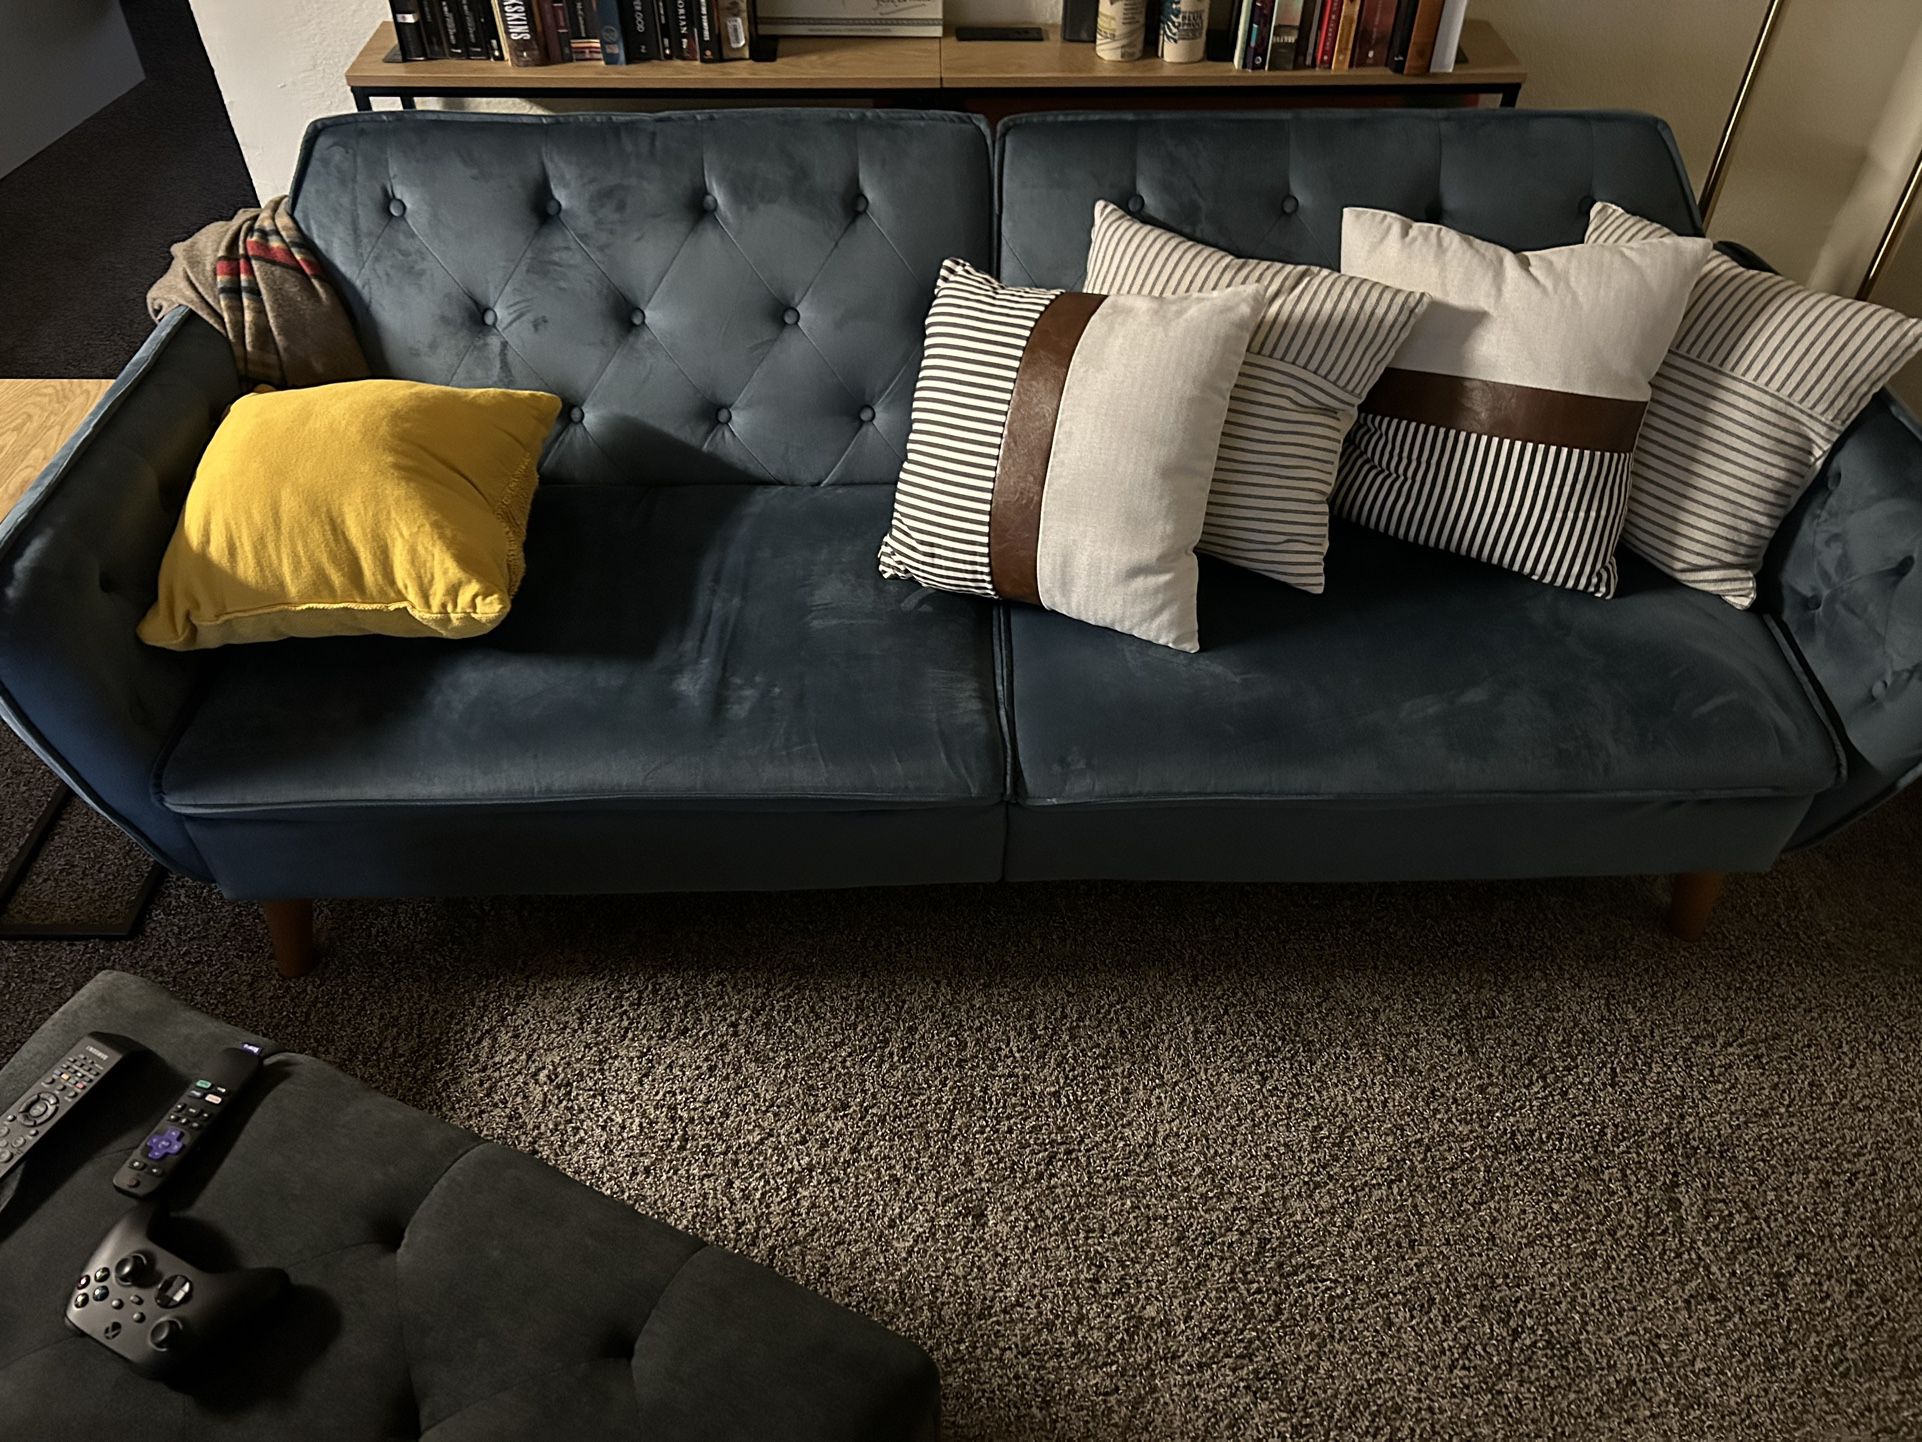 Moving Sale - Couch And Ottoman 